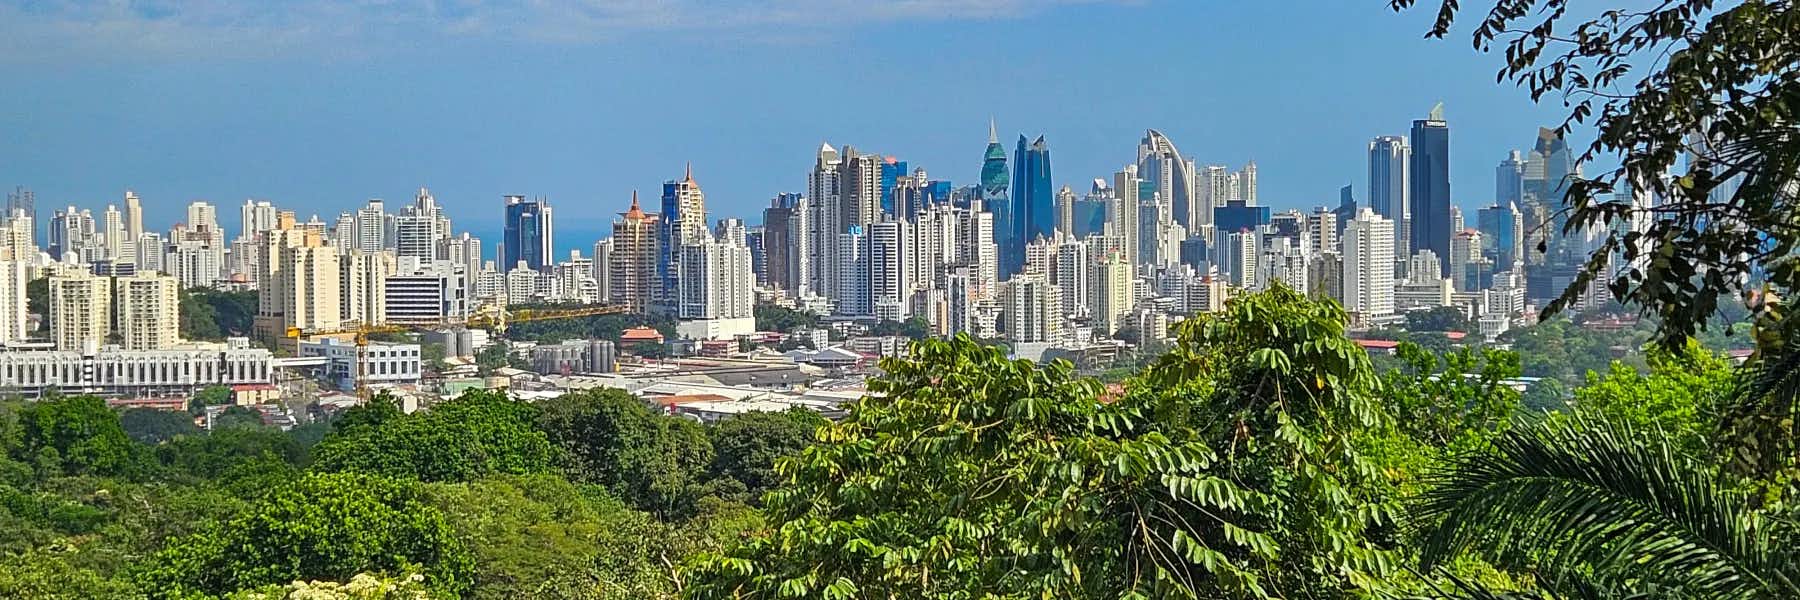 10 Amazing Things to Do in Panama While You Visit the Country